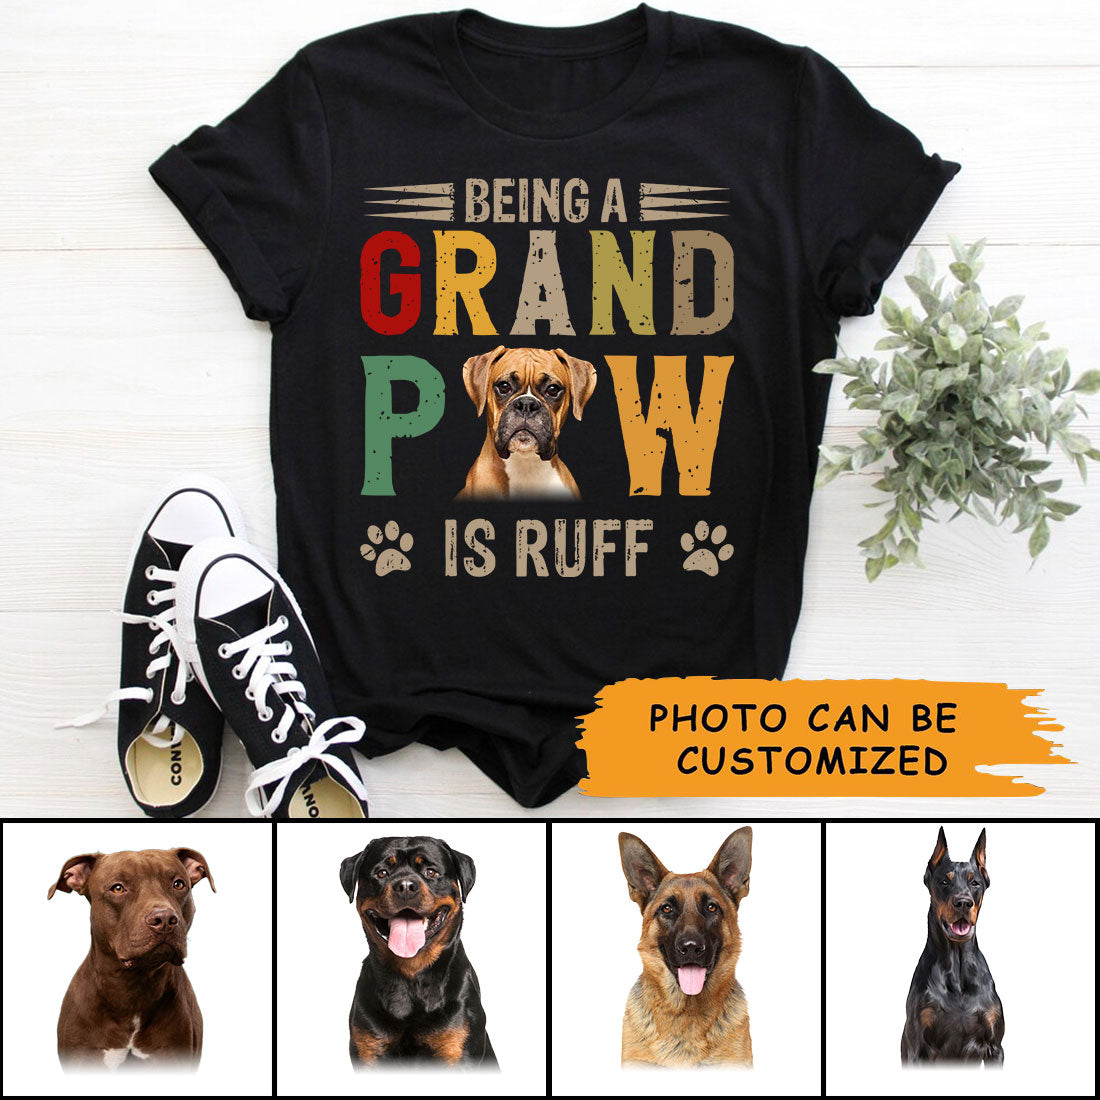 Dog Unisex T Shirt Custom - Customize Photo Being A Grand Paw Is Ruff Personalized Unisex T Shirt - Gift For Dog Lovers, Friend, Family